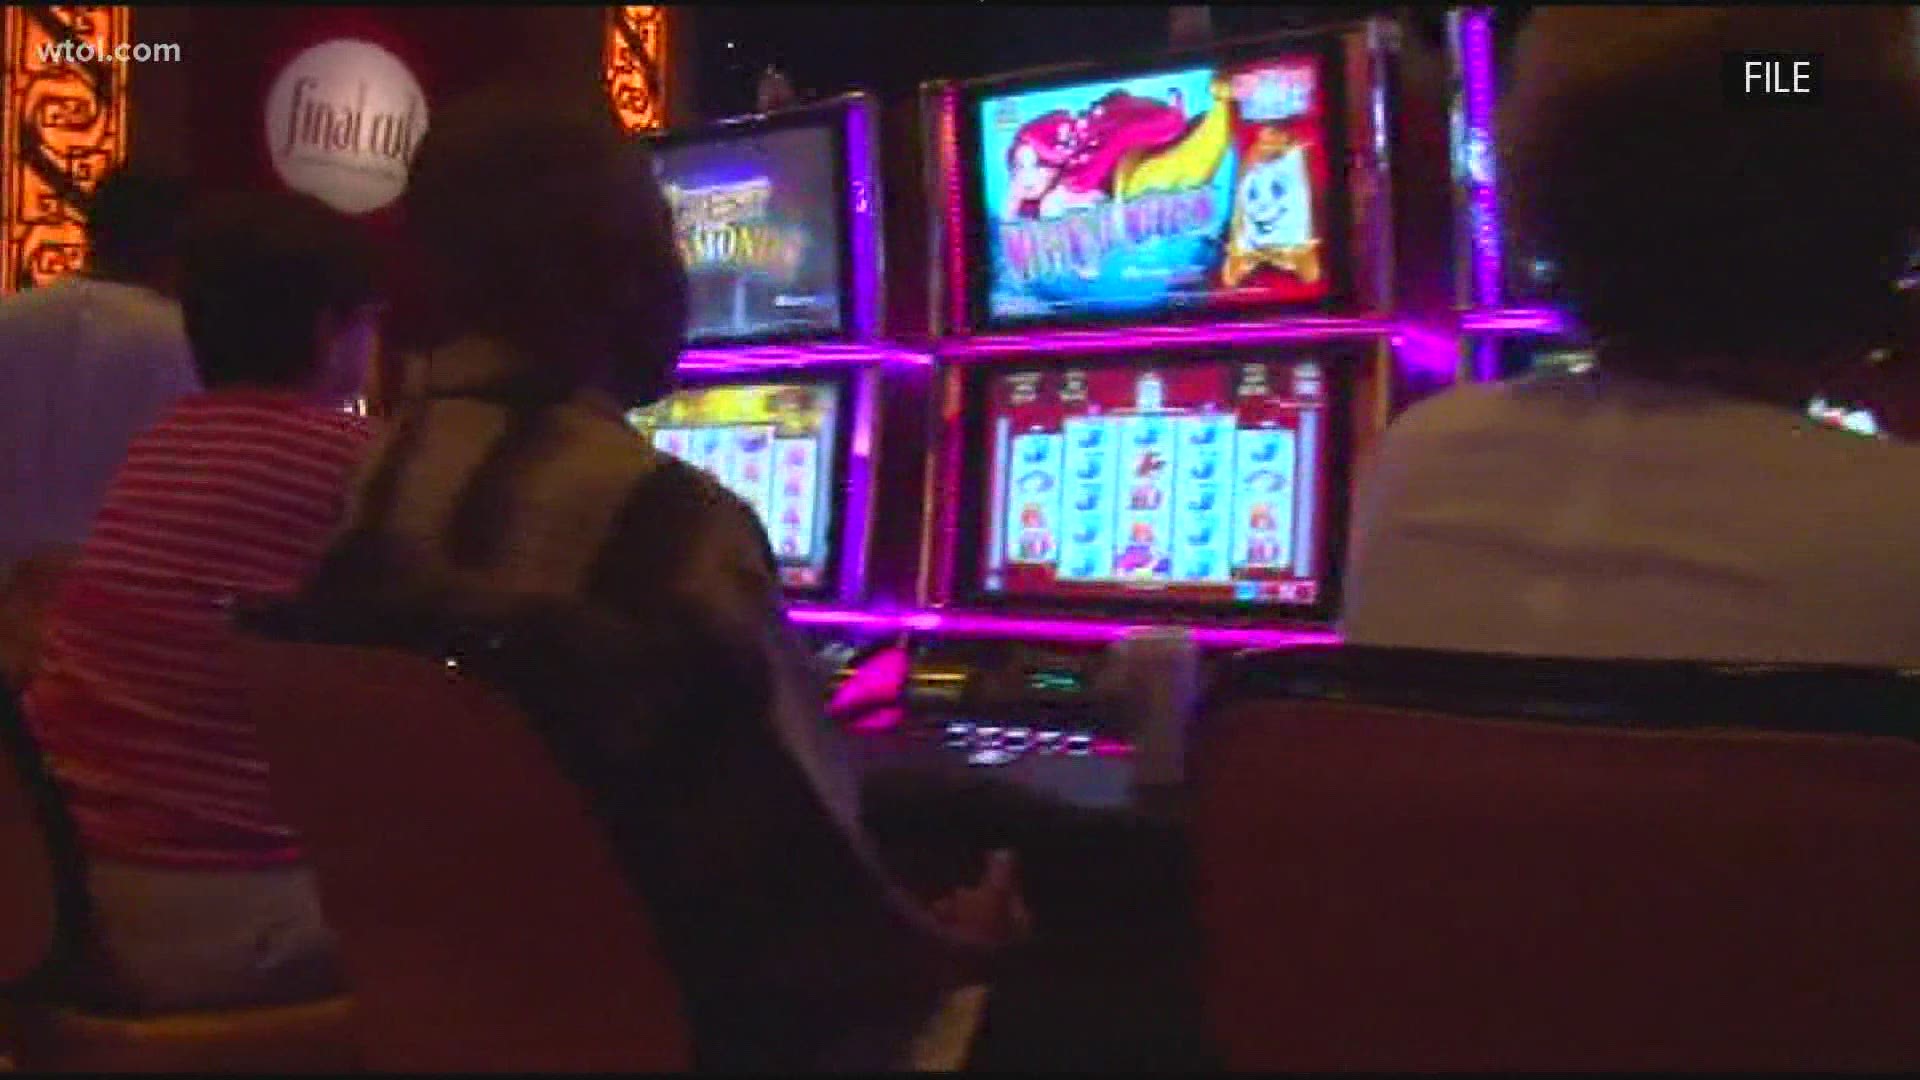 If you're over 21, you'll get $20 in free slot play at the casino after you get your shot.